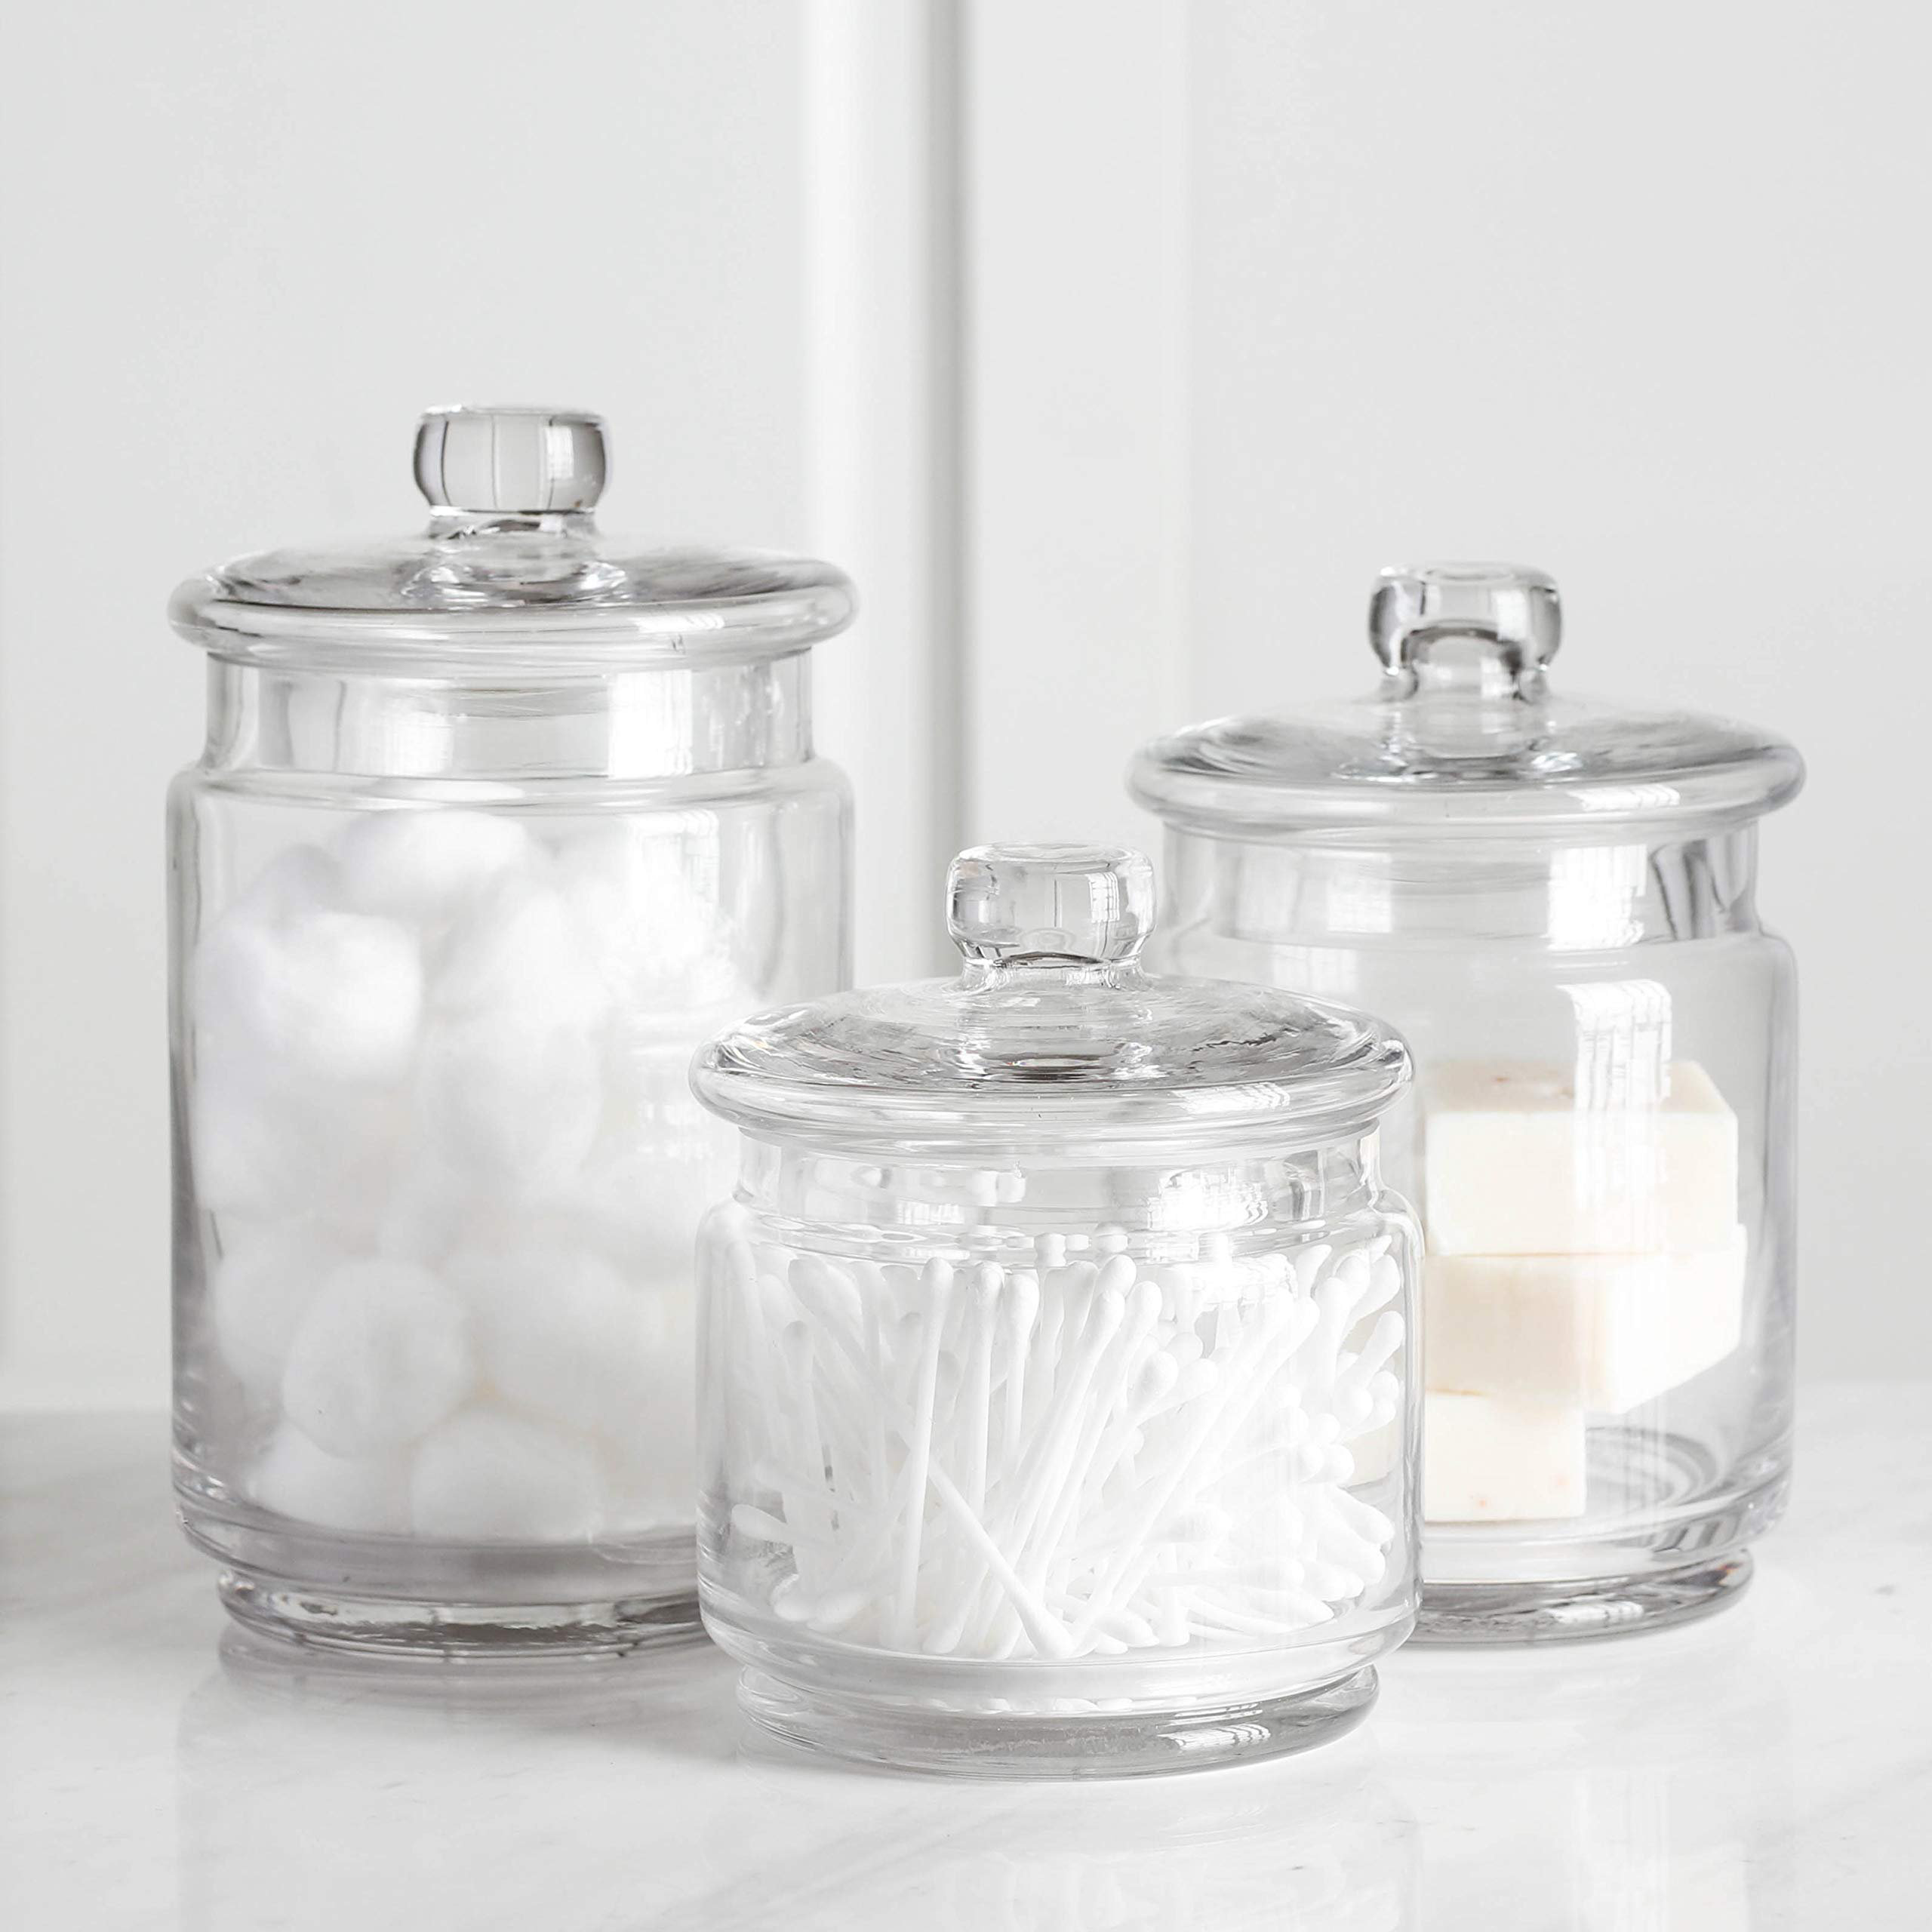 WHOLE HOUSEWARES, Glass Apothecary Jars With Lids